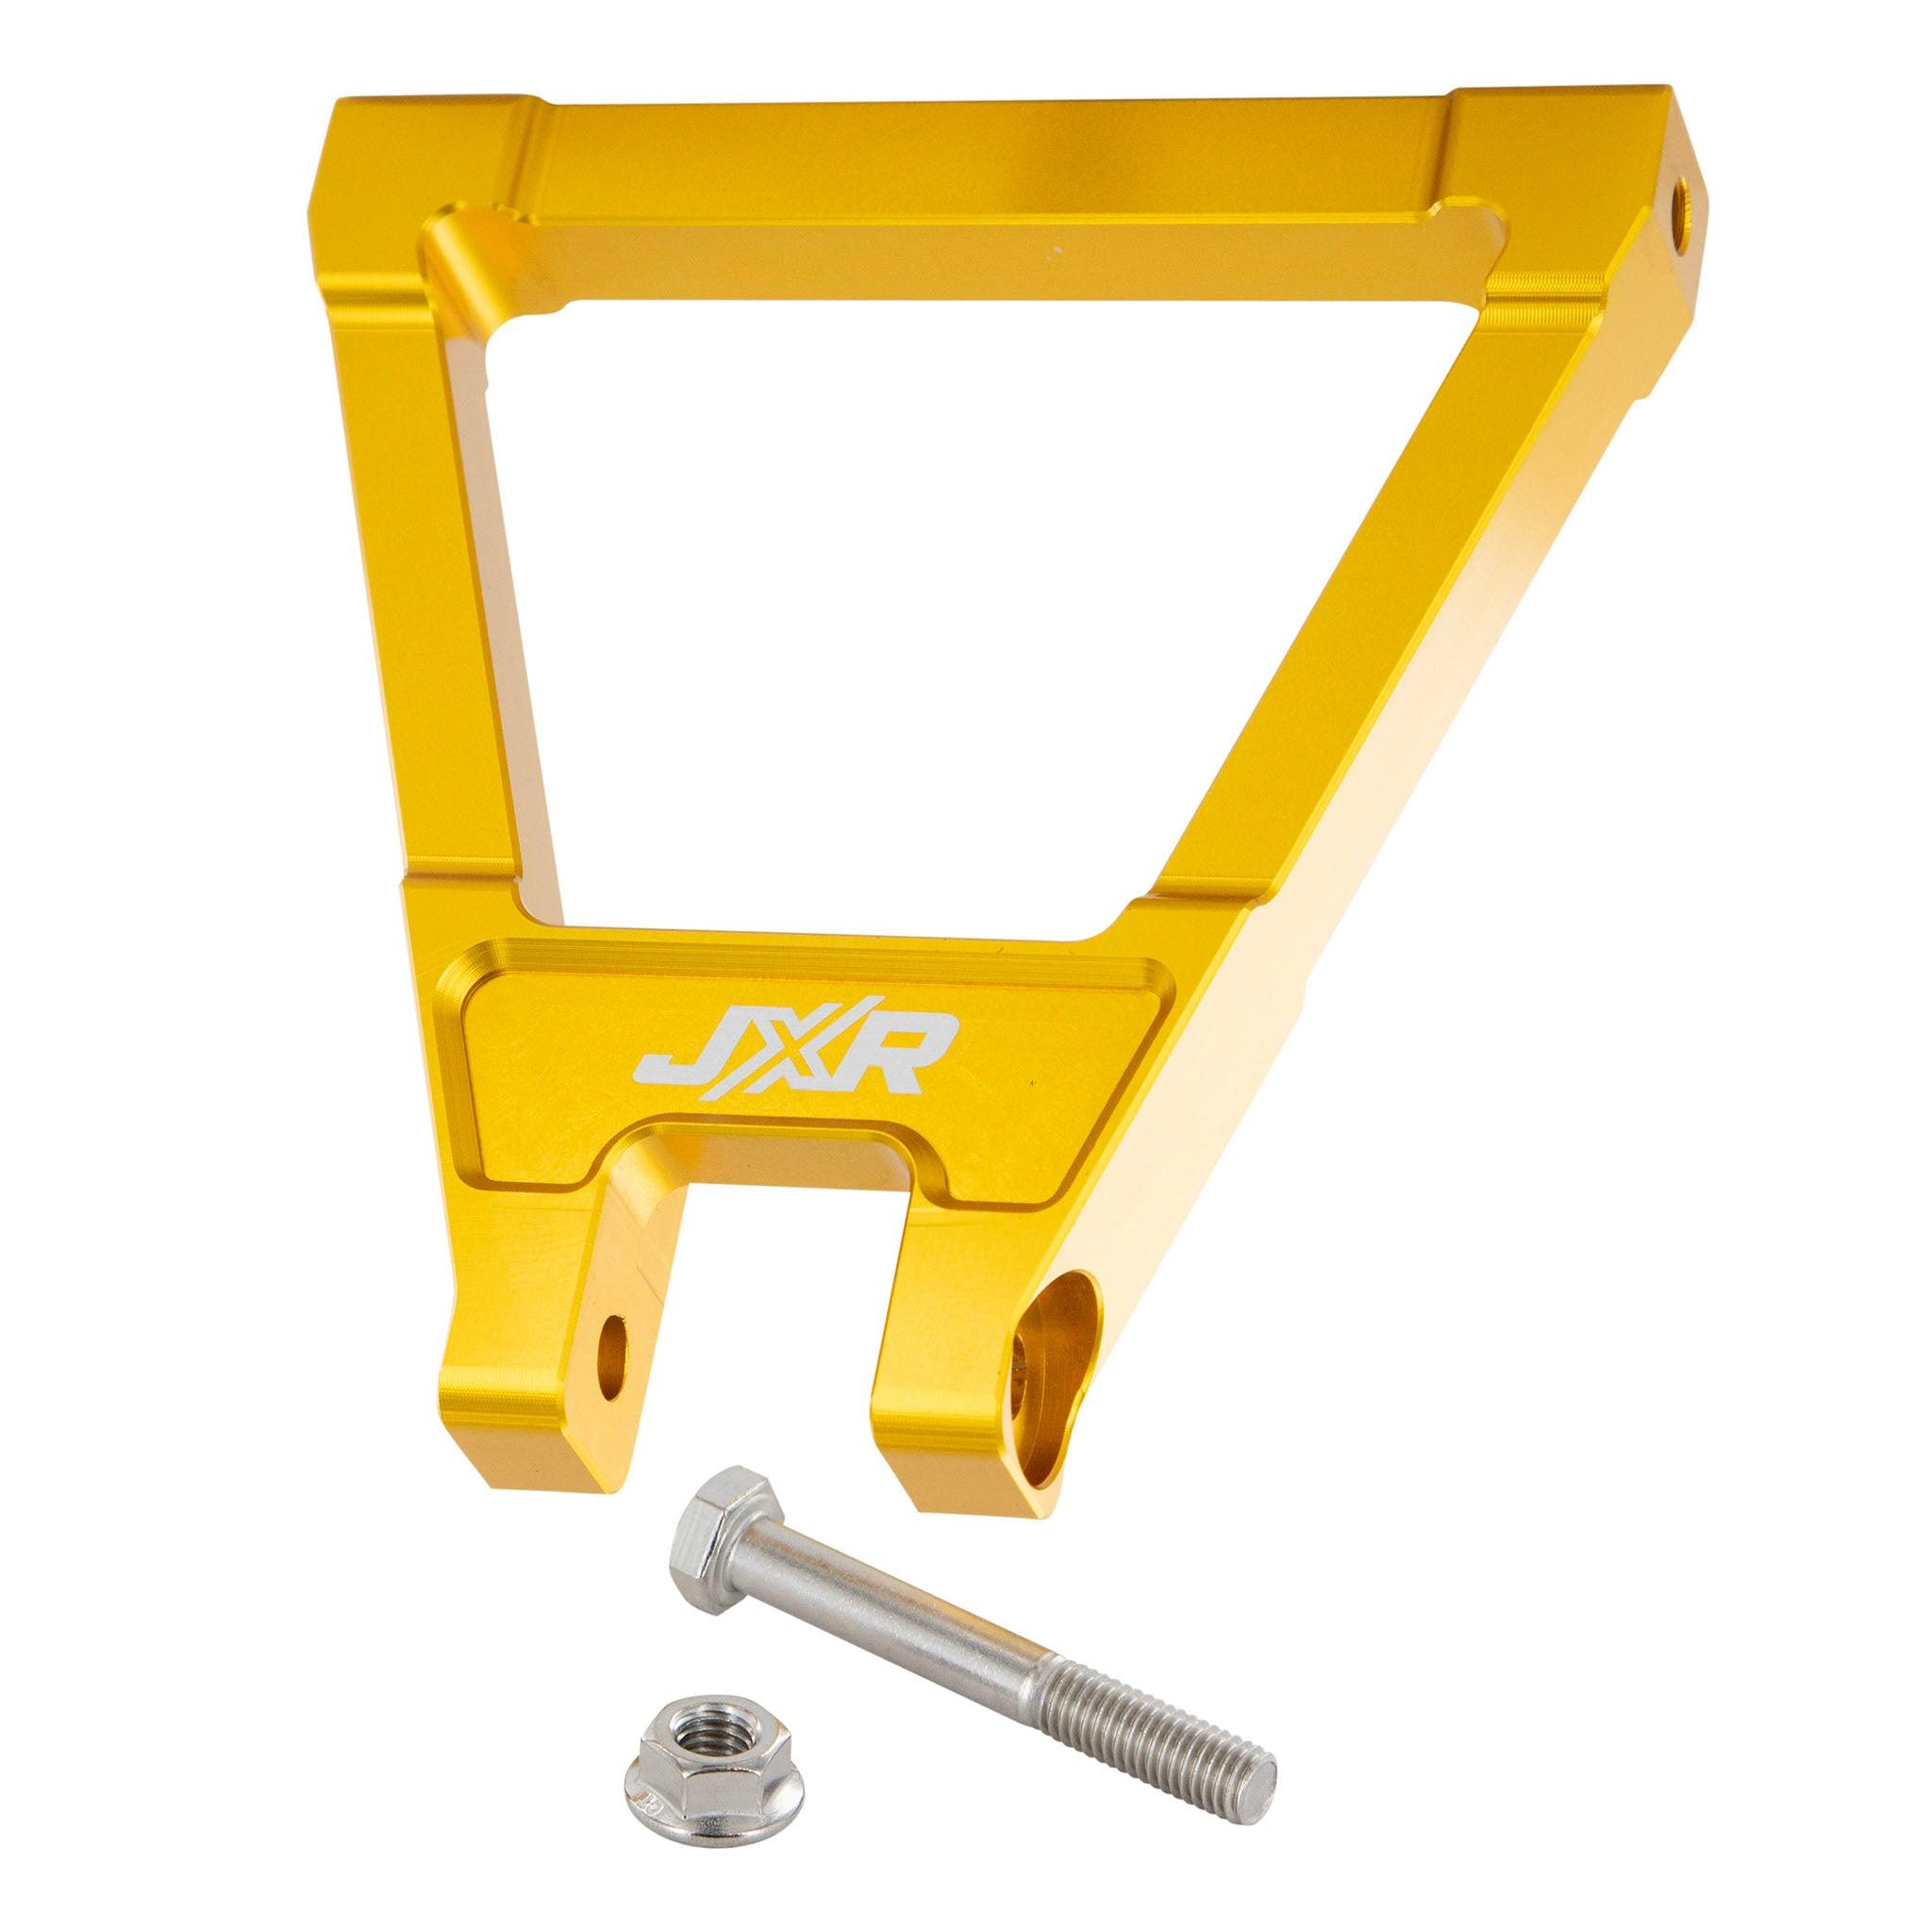 JXR Upgraded Rear Suspension Linkage Arm To Fit Surron Light Bee